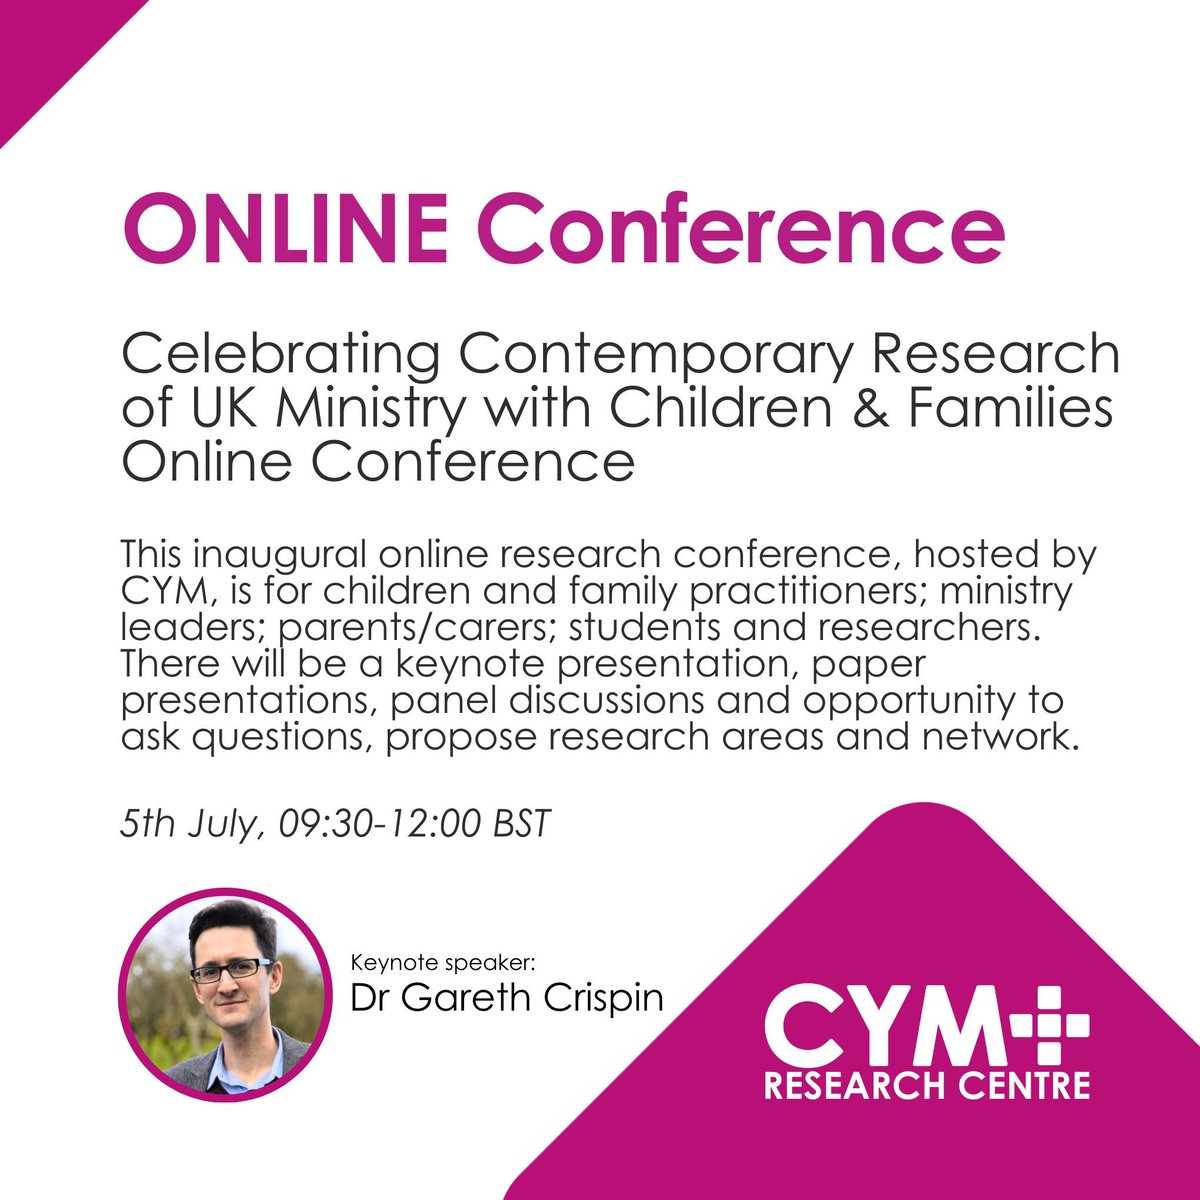 ONLINE conference - 'Celebrating Contemporary Research of UK Ministry with Children & Families Online Conference ' You can sign up through the link in the bio.